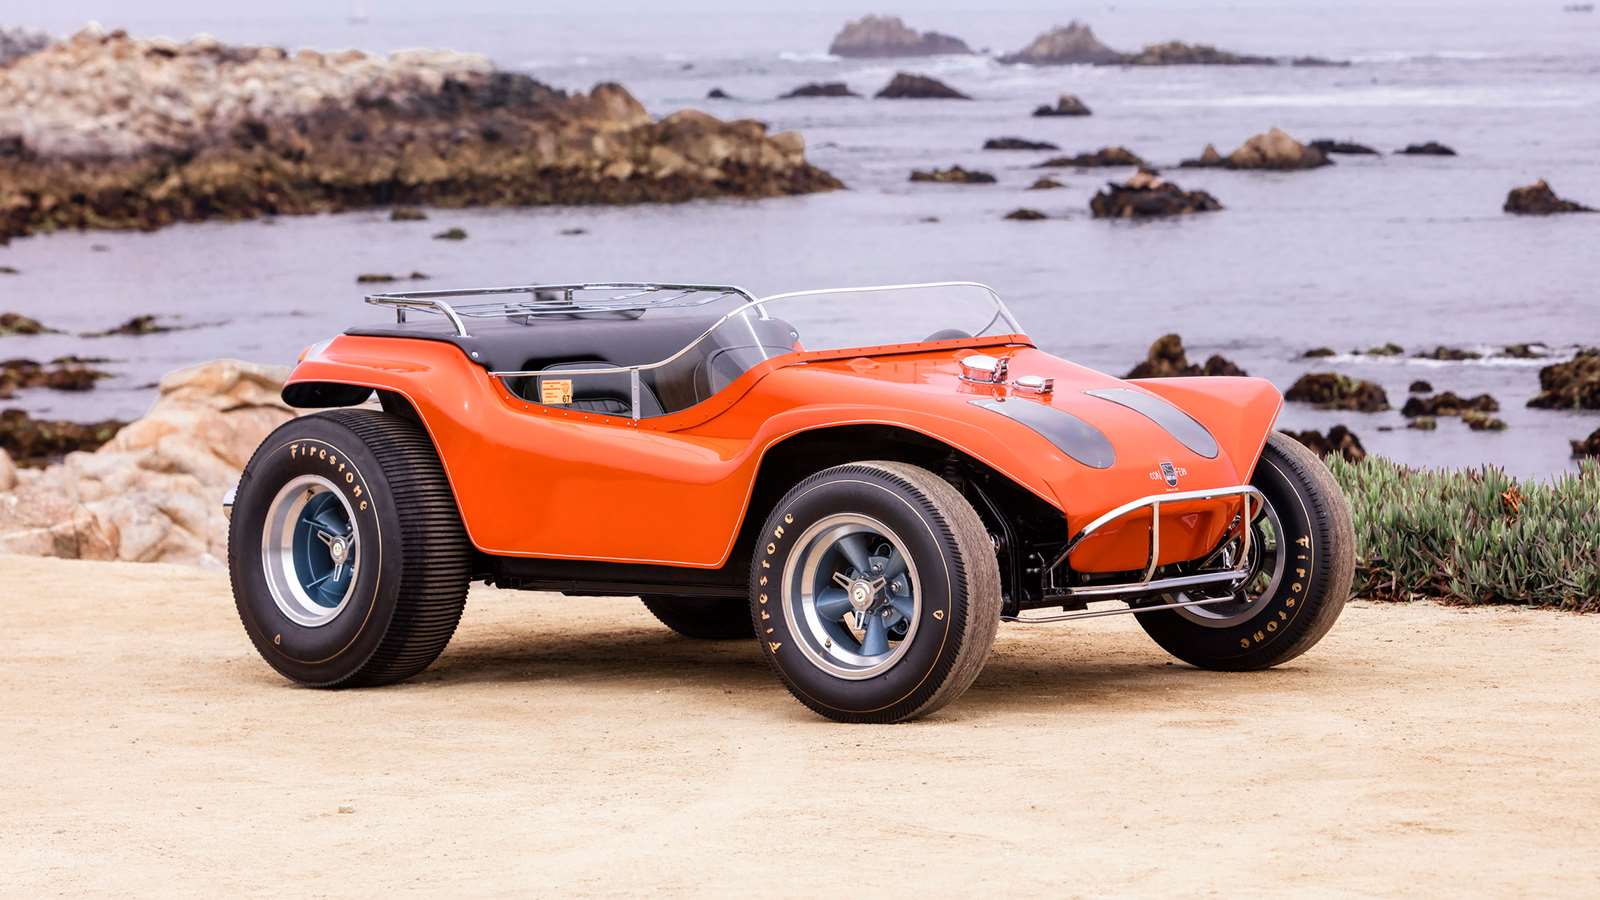 $456000 Makes this the world’s most expensive beach buggy GRR